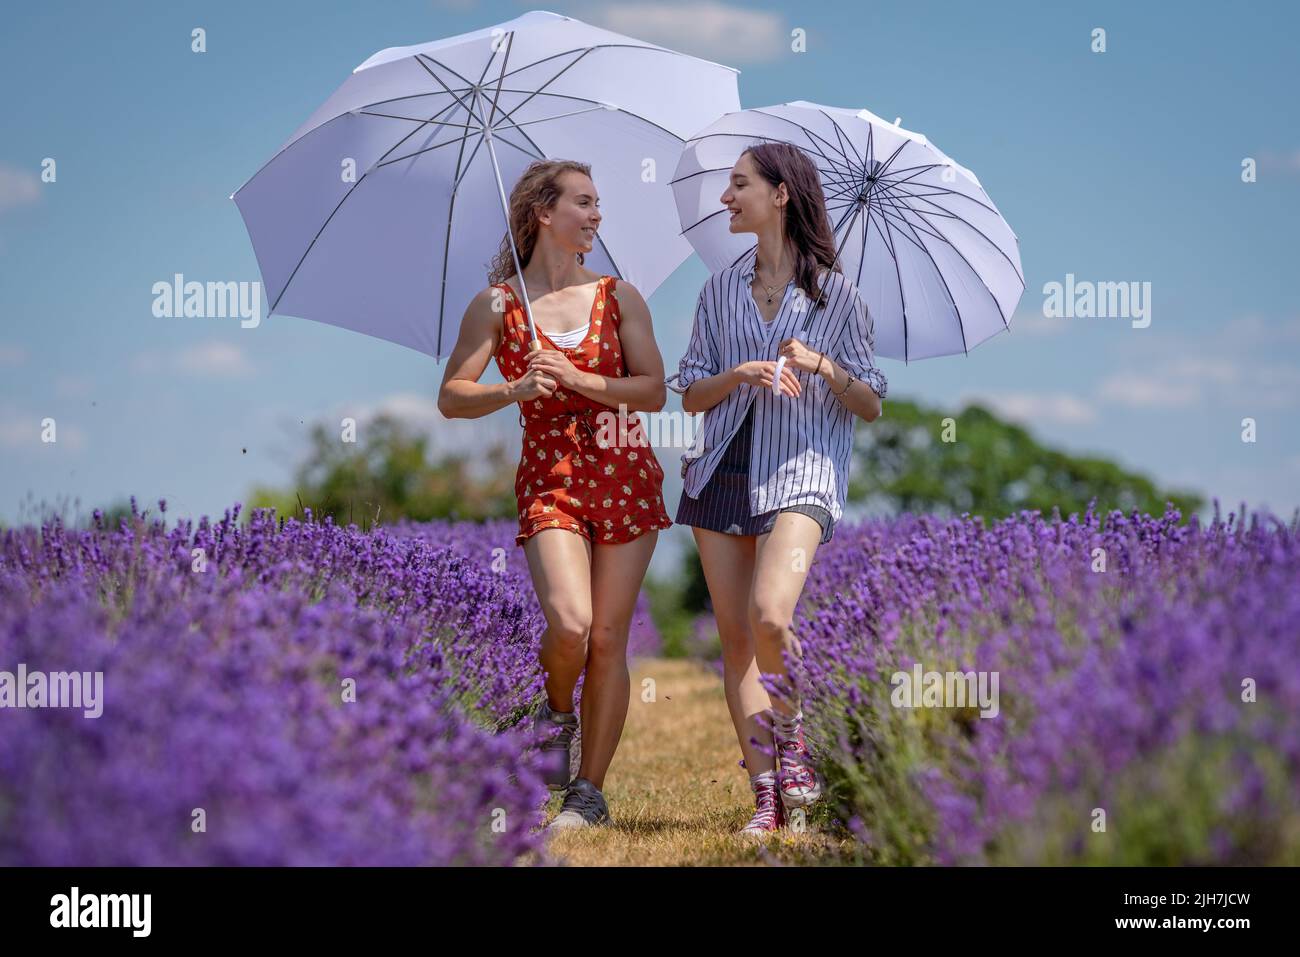 Banstead, Surrey, UK. 16th July, 2022. UK Weather: Annelise and Rebecca enjoy the vivid rows of organic lavender currently in full bloom on Mayfield Lavender Farm during the on-going UK heatwave with temperatures expected to reach 39C in the coming days. Credit: Guy Corbishley/Alamy Live News Stock Photo